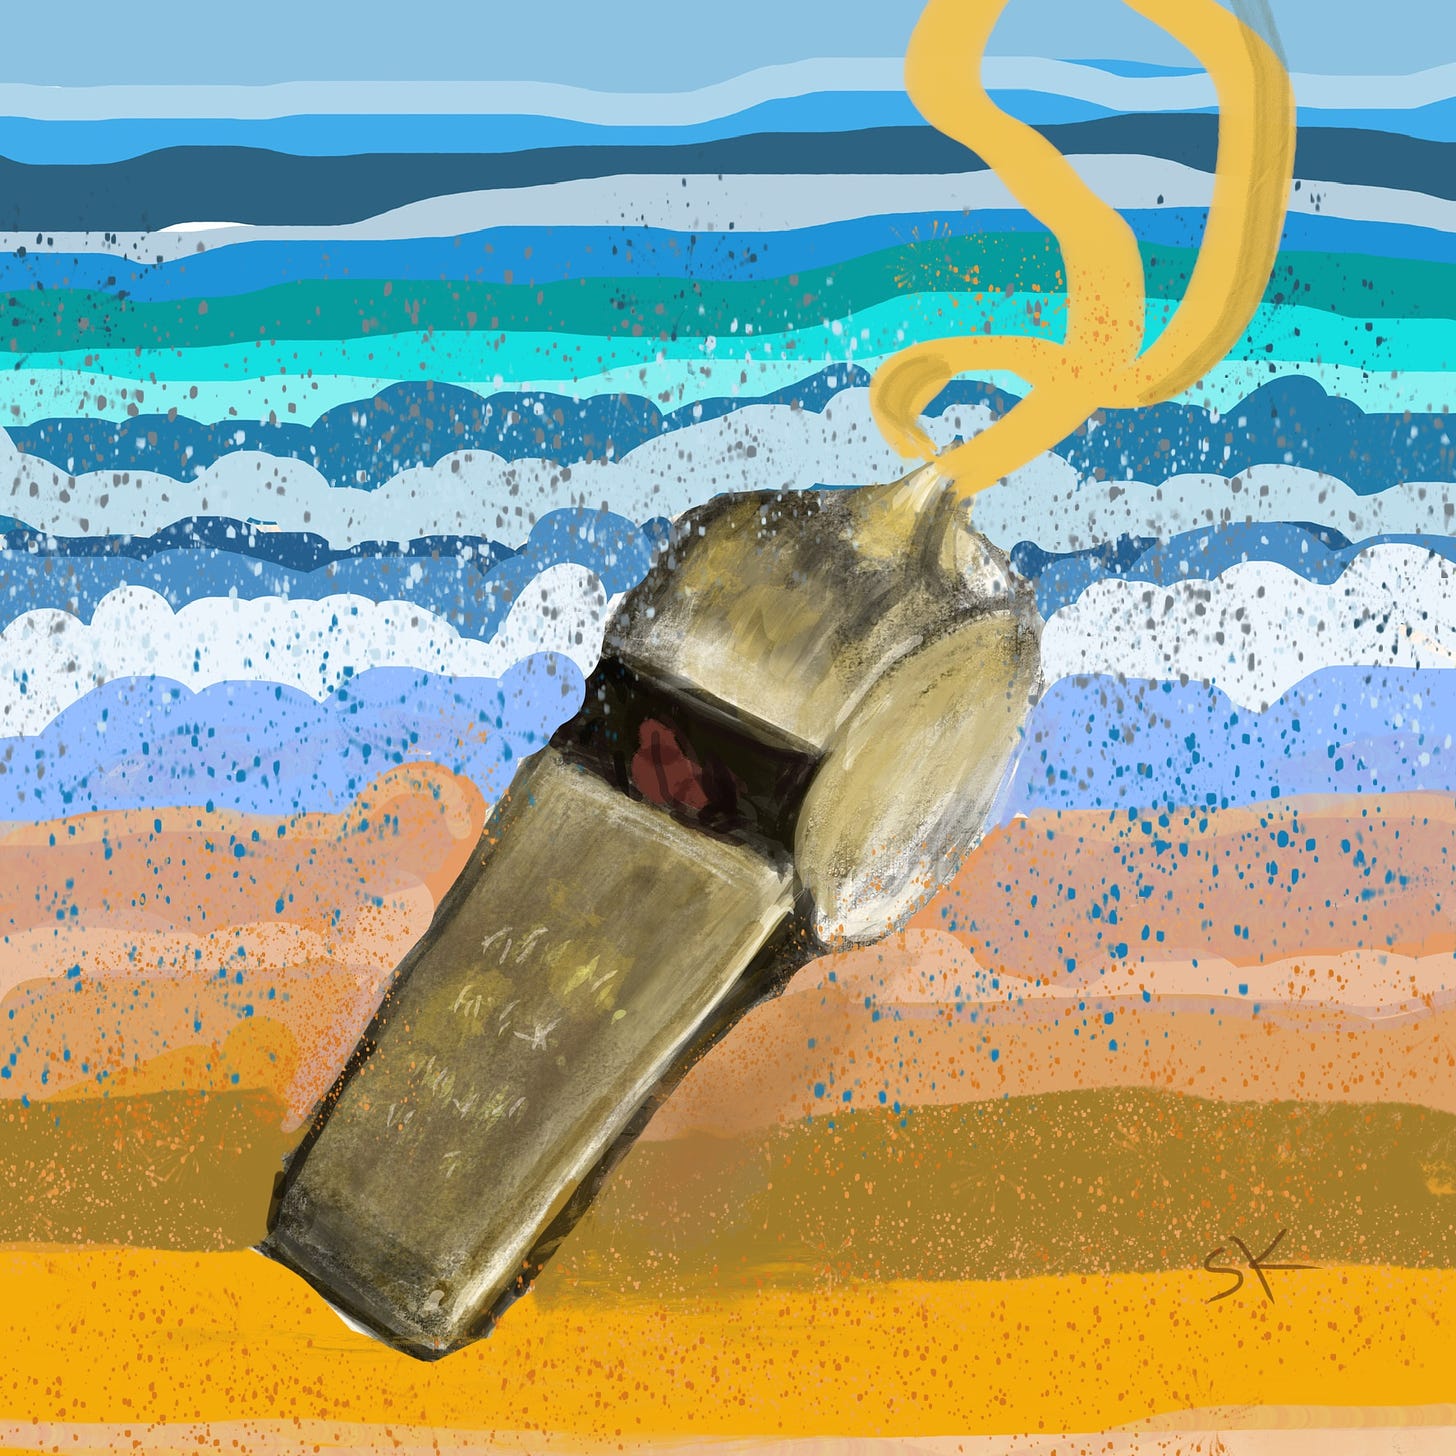 Abstract painting by Sherry Killam arts featuring a vintage metal whistle on a yellow lanyard above a beach scene with surf, waves, and blue sky.